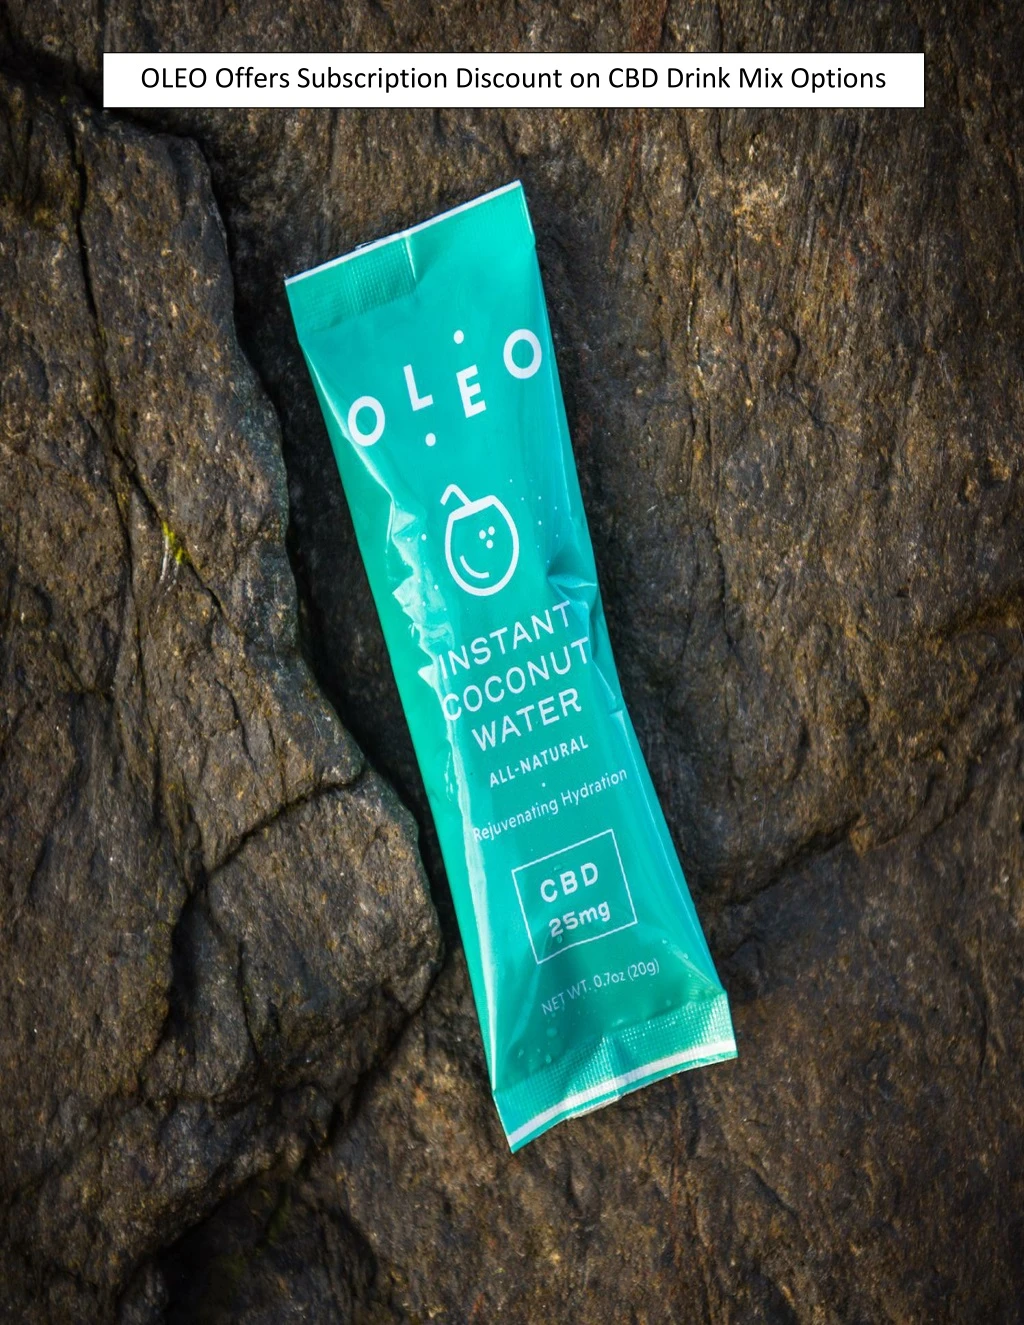 oleo offers subscription discount on cbd drink